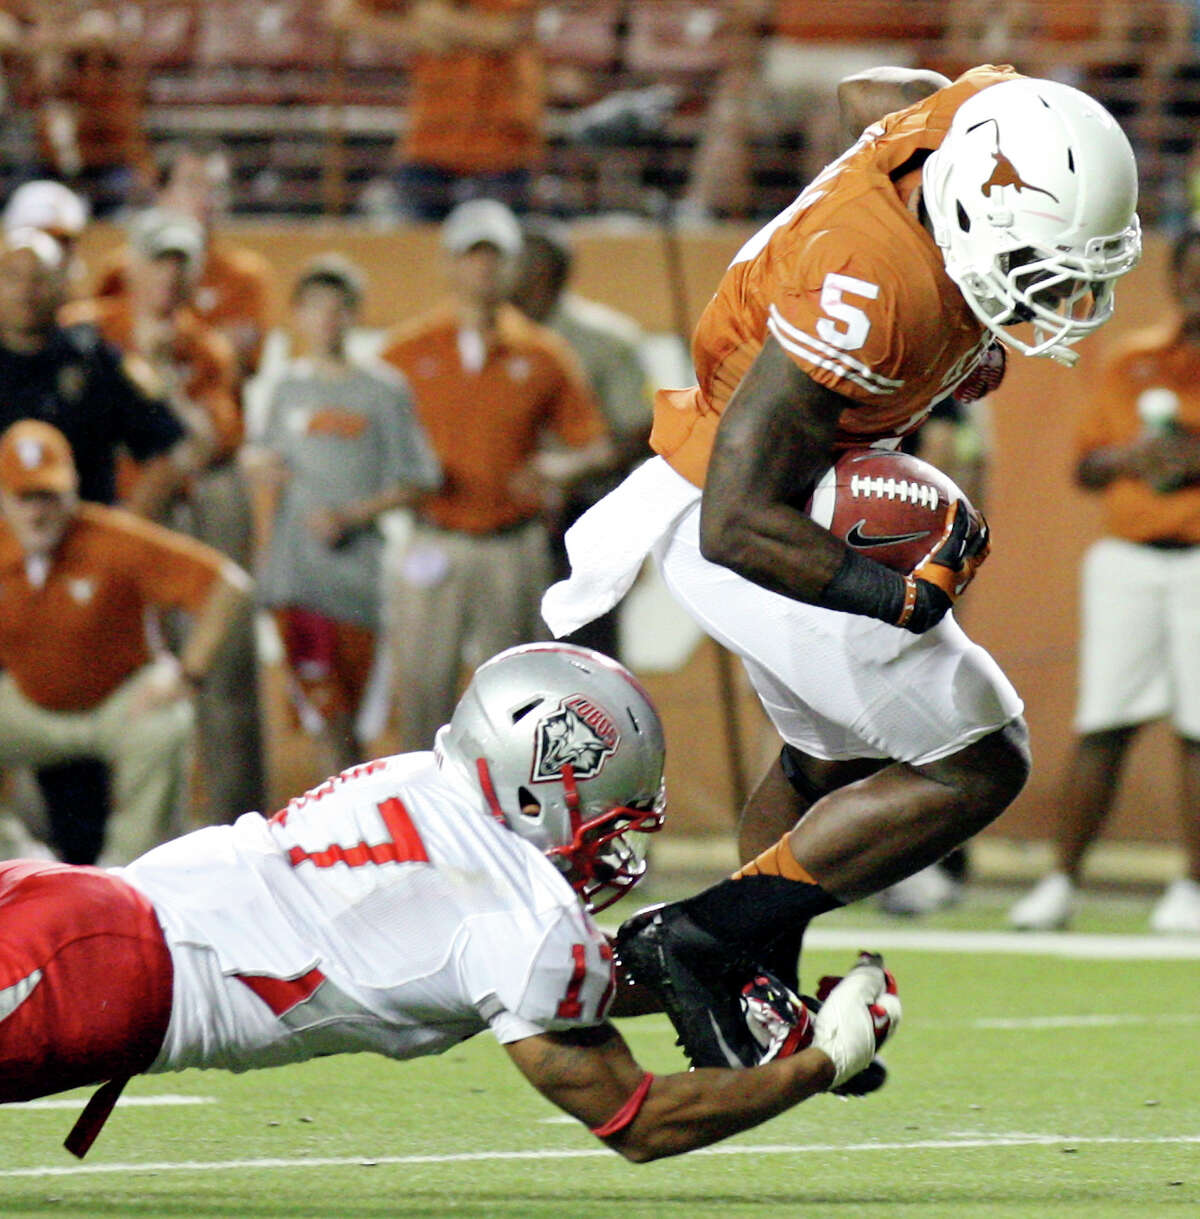 Texas Longhorns' Jeremy Hills tries to shake the tackle of New Mexico Lobos' Freddie Young during second half action Saturday Sept. 8, 2012 at Texas Memorial Stadium in Austin, Tx. The Longhorns won 45-0.